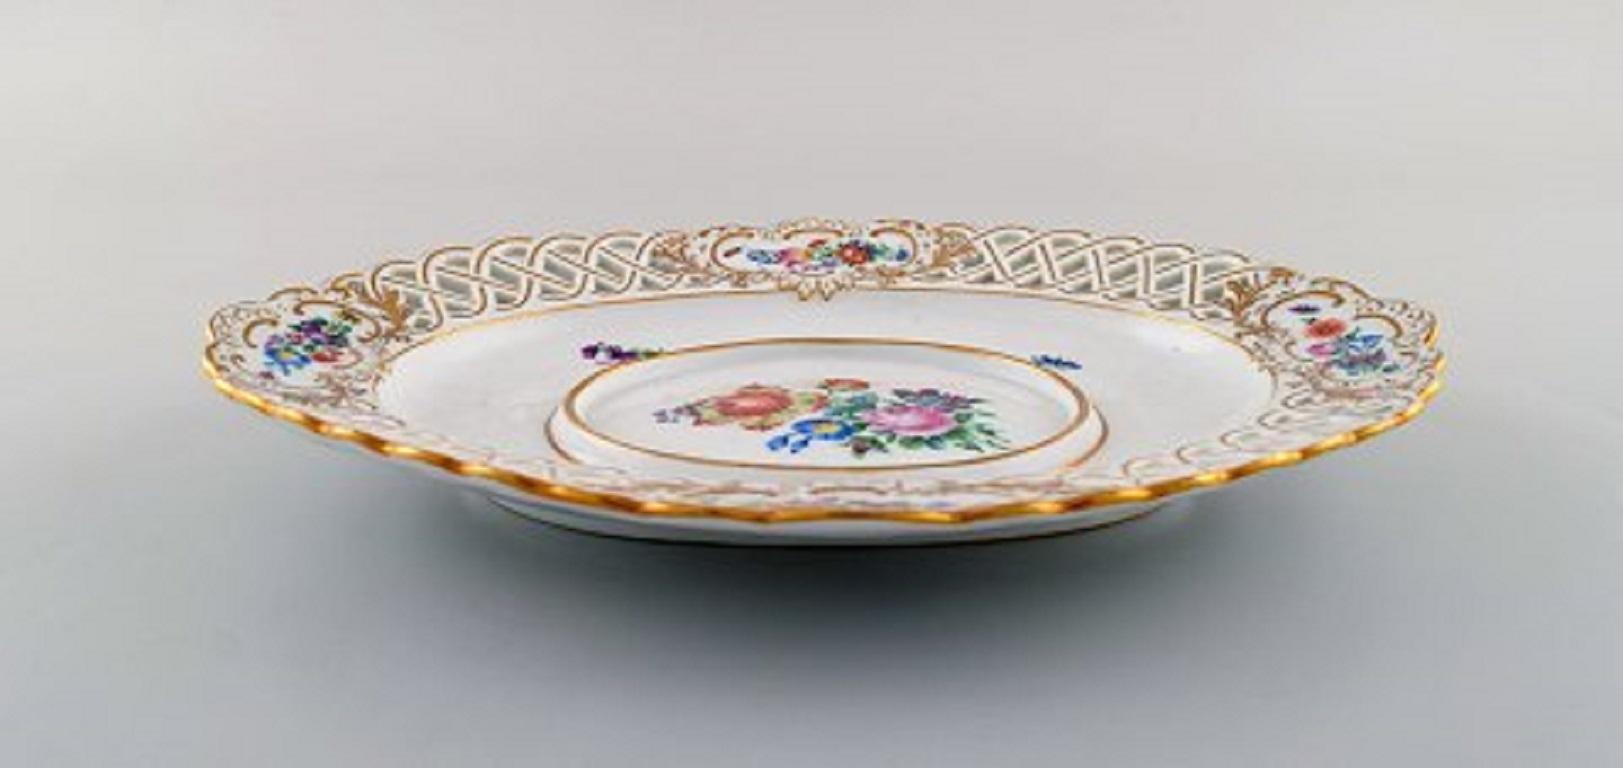 Antique Meissen saucer in hand painted porcelain with floral and gold decoration, late 19th century.
Measures: 26.5 x 19.5 cm.
In very good condition.
Stamped.
1st factory quality.